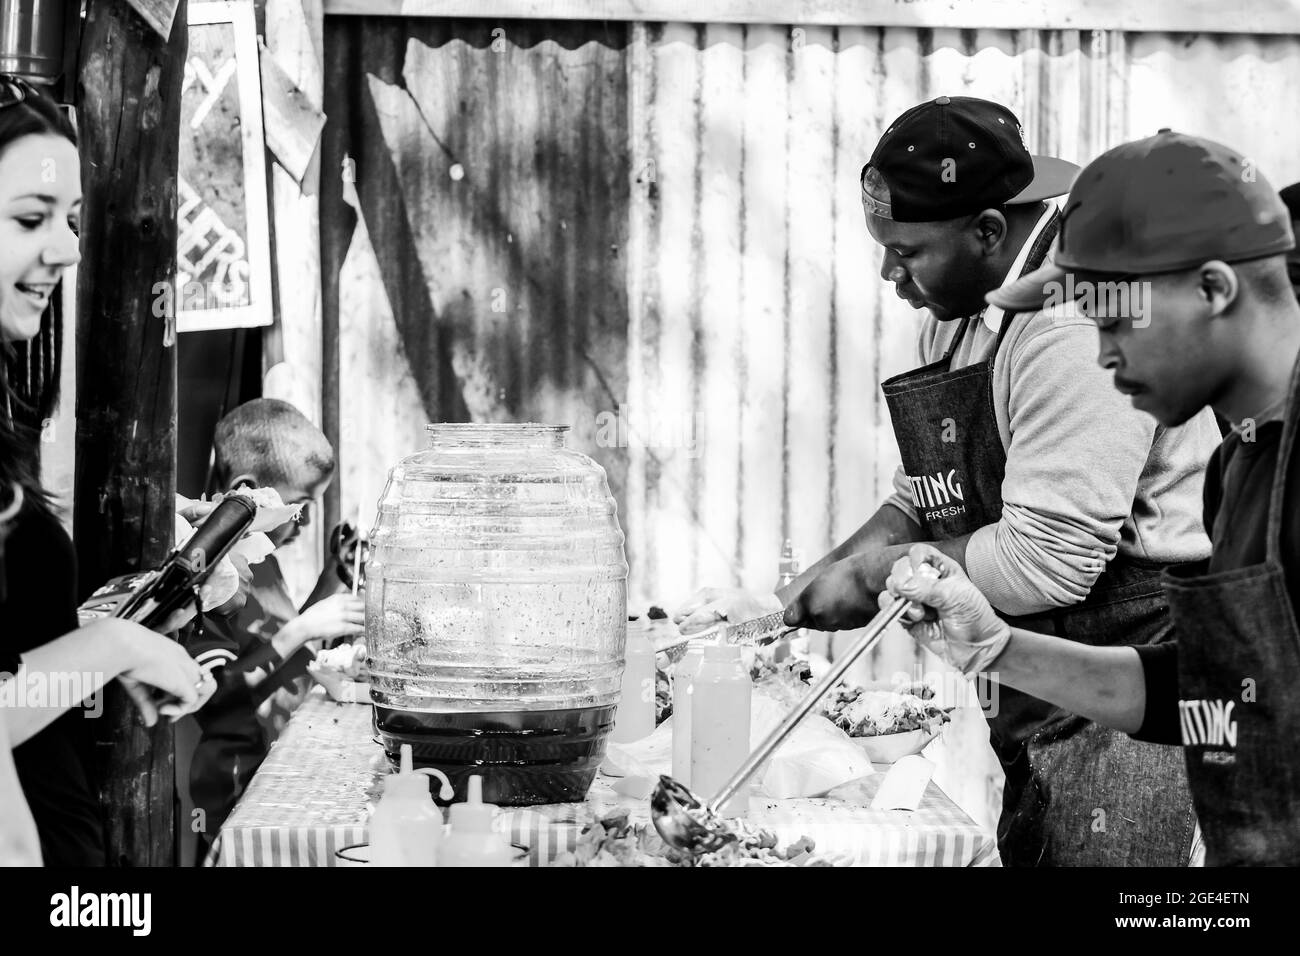 JOHANNESBURG, SOUTH AFRICA - Jan 05, 2021: A grayscale African male vendor selling take-out food at an outdoor stall at farmer's market Stock Photo